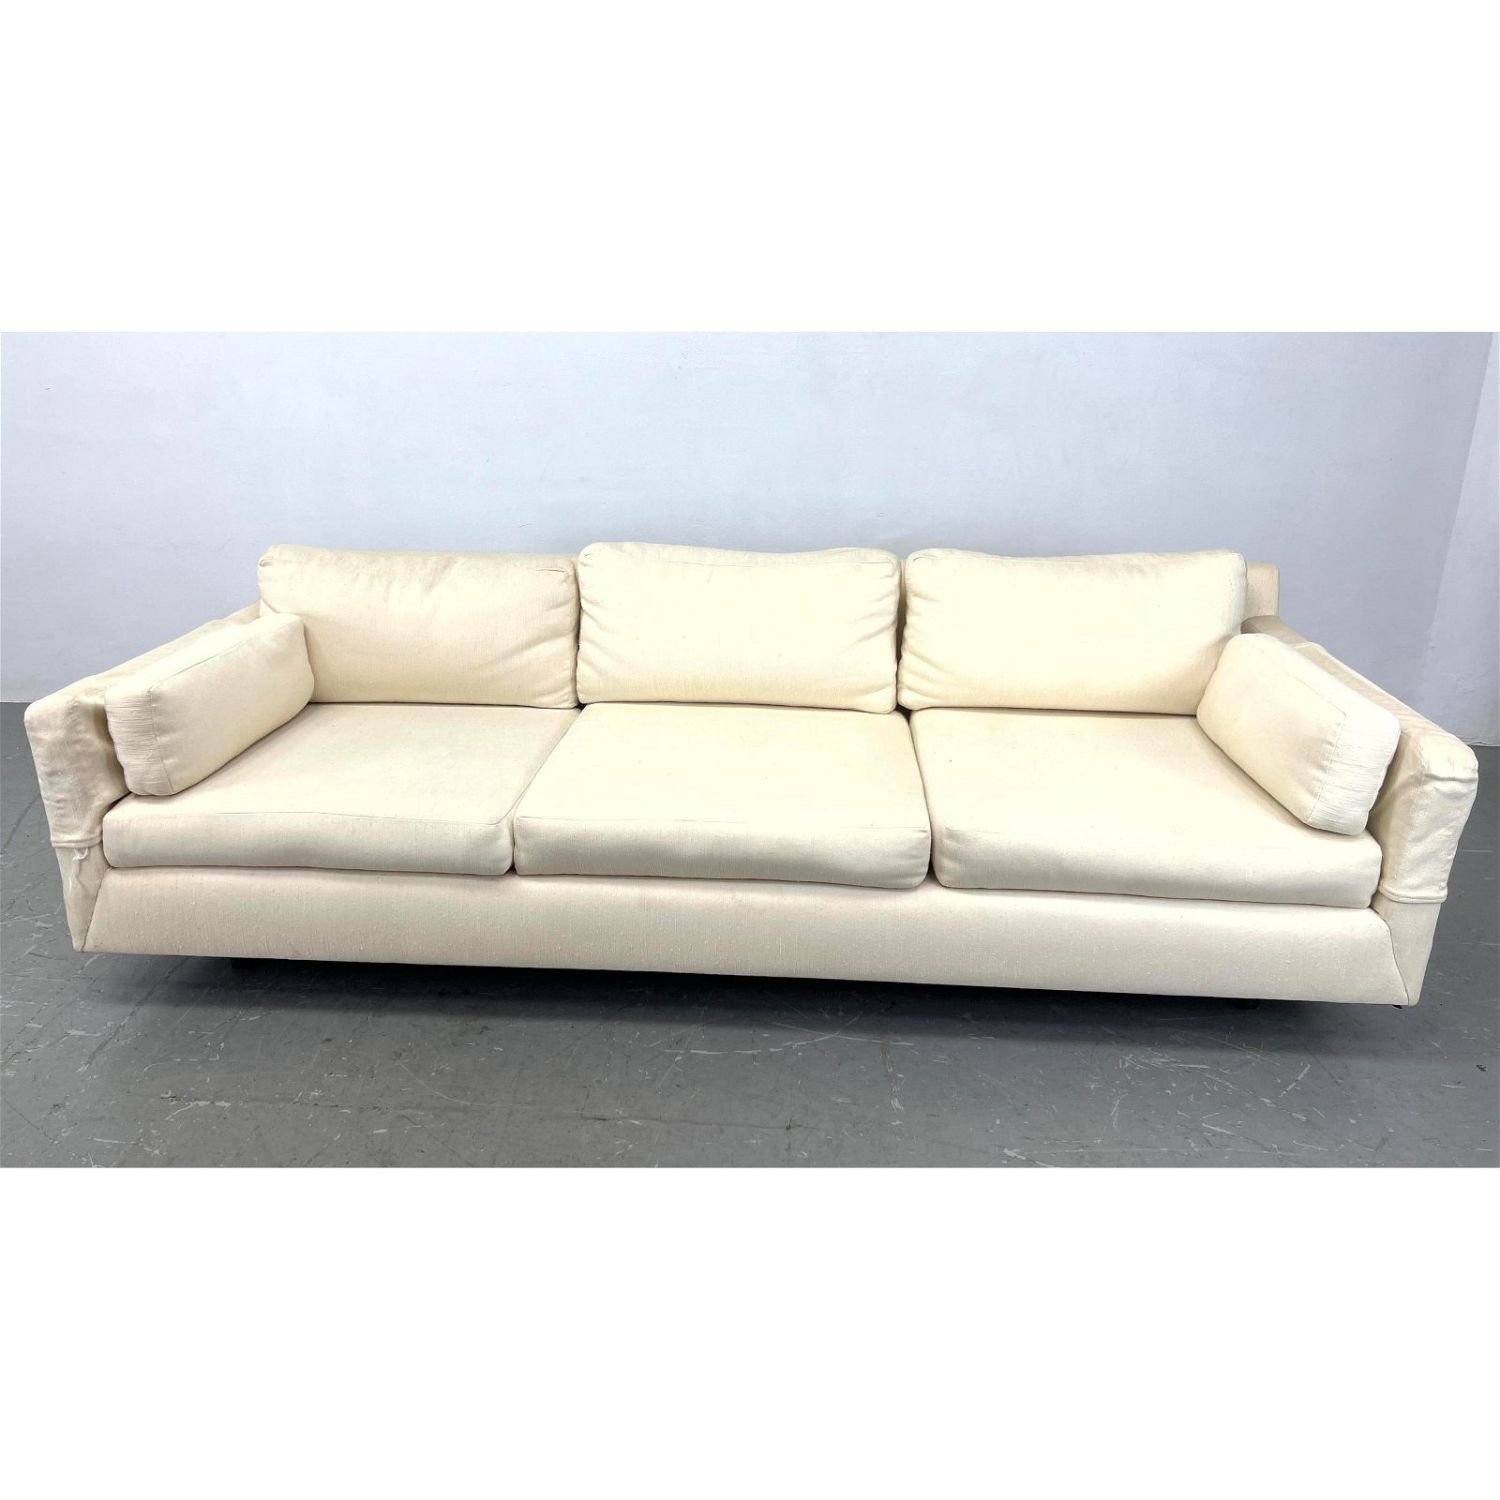 Harvey Probber Style Sofa Couch  362e3f